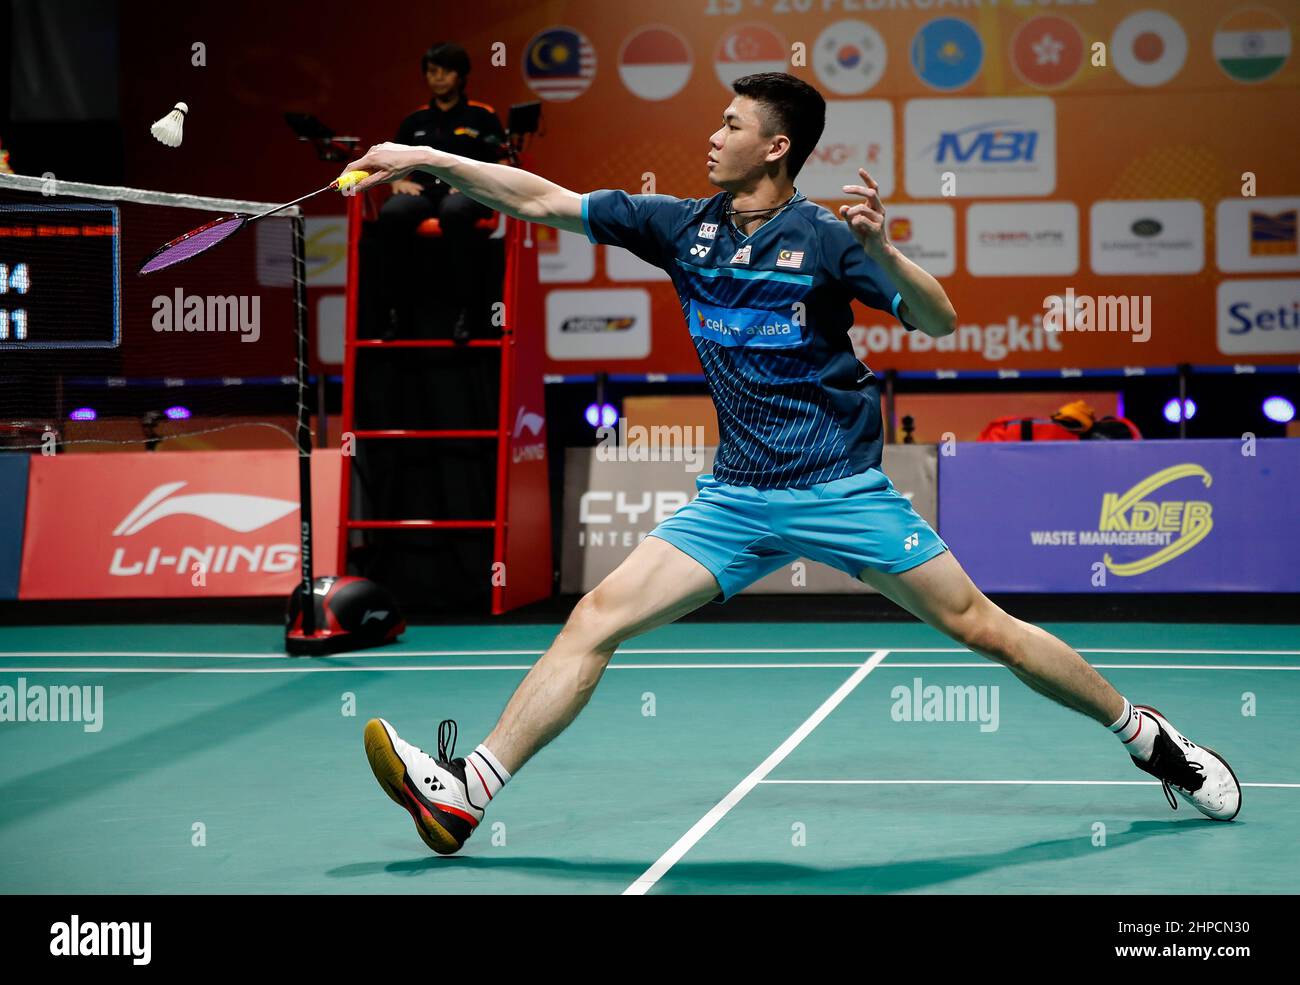 Lee Zii Jia of Malaysia plays against Dwi Wardoyo Chico Aura of Indonesia during the team final of the mens singles match at the Badminton Asia Team Championships 2022 in Shah Alam